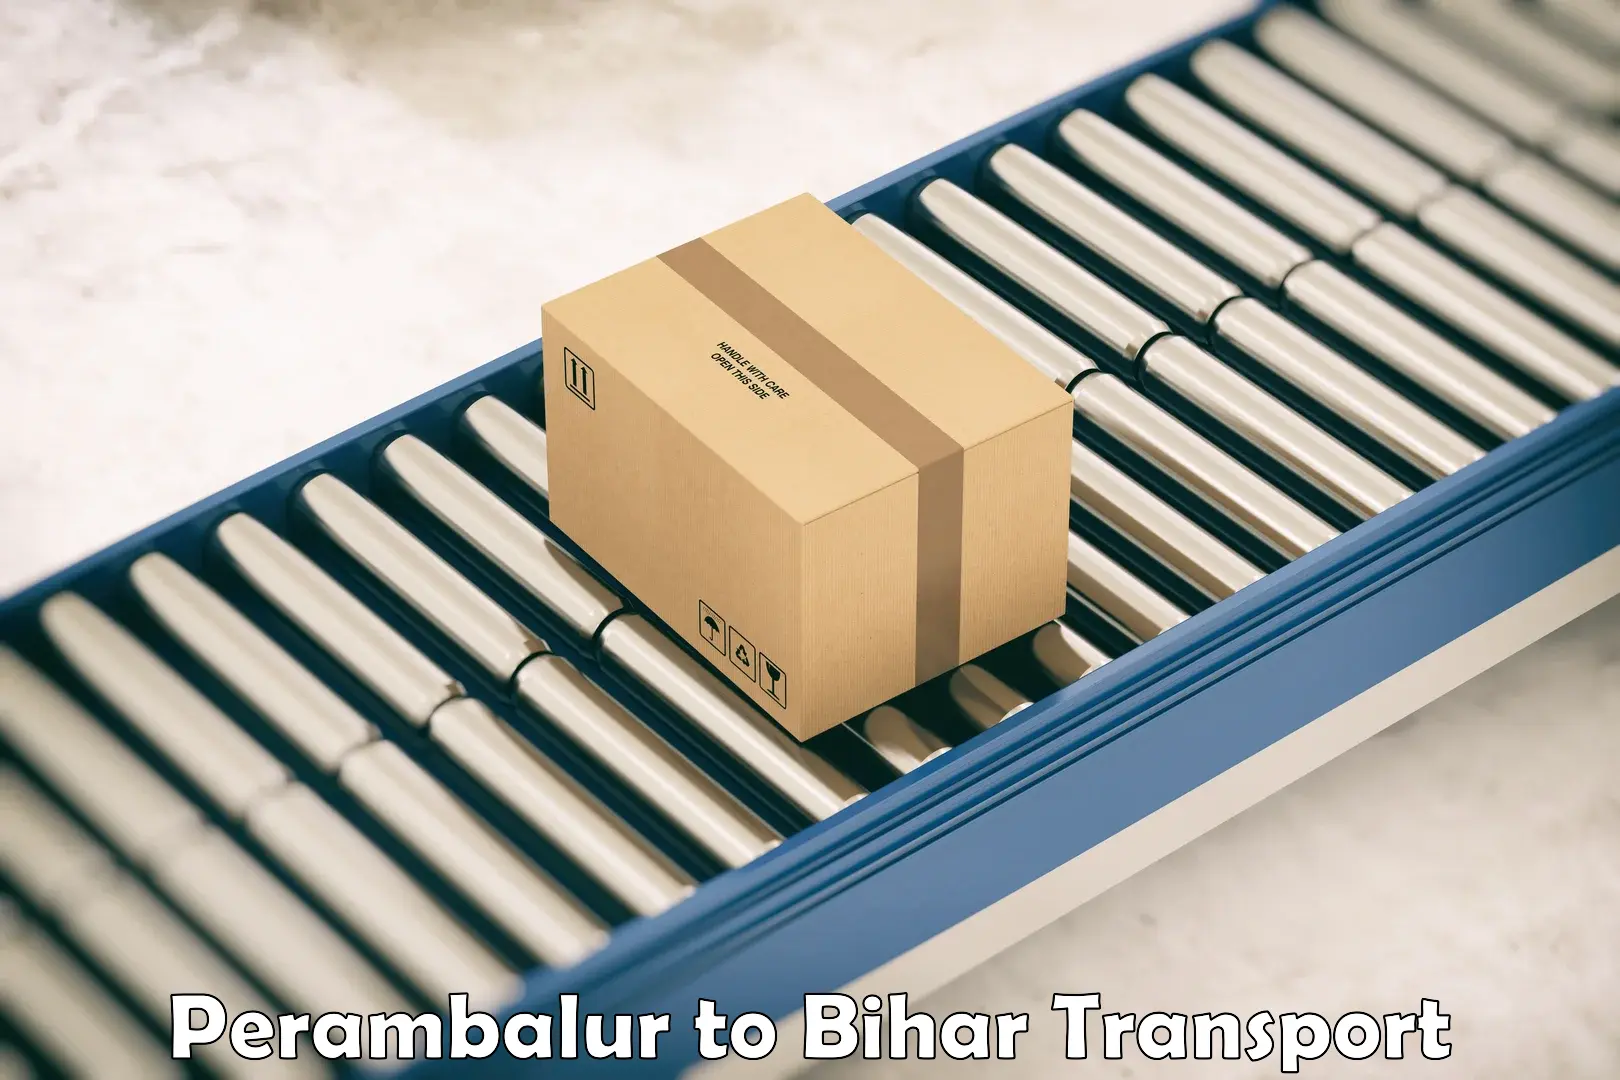 Goods delivery service Perambalur to Sudhani